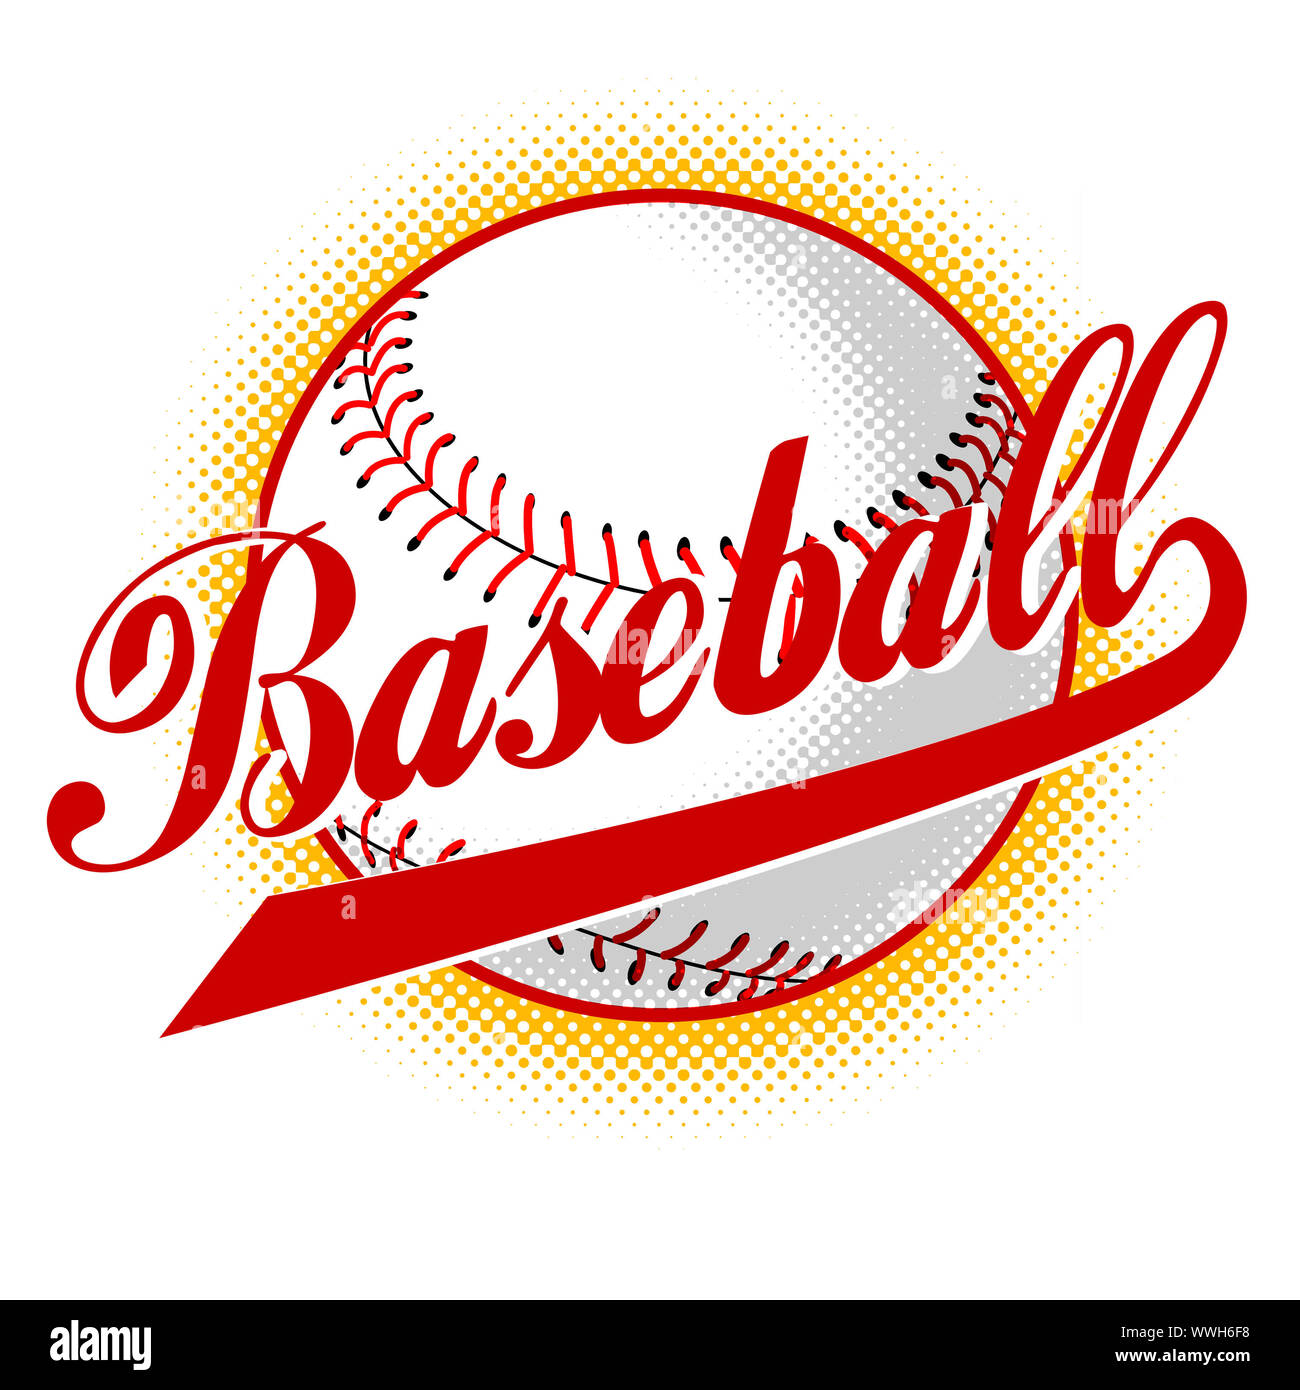 Illustration of a baseball ball with halftone dots in background on isolated background with words baseball Stock Photo